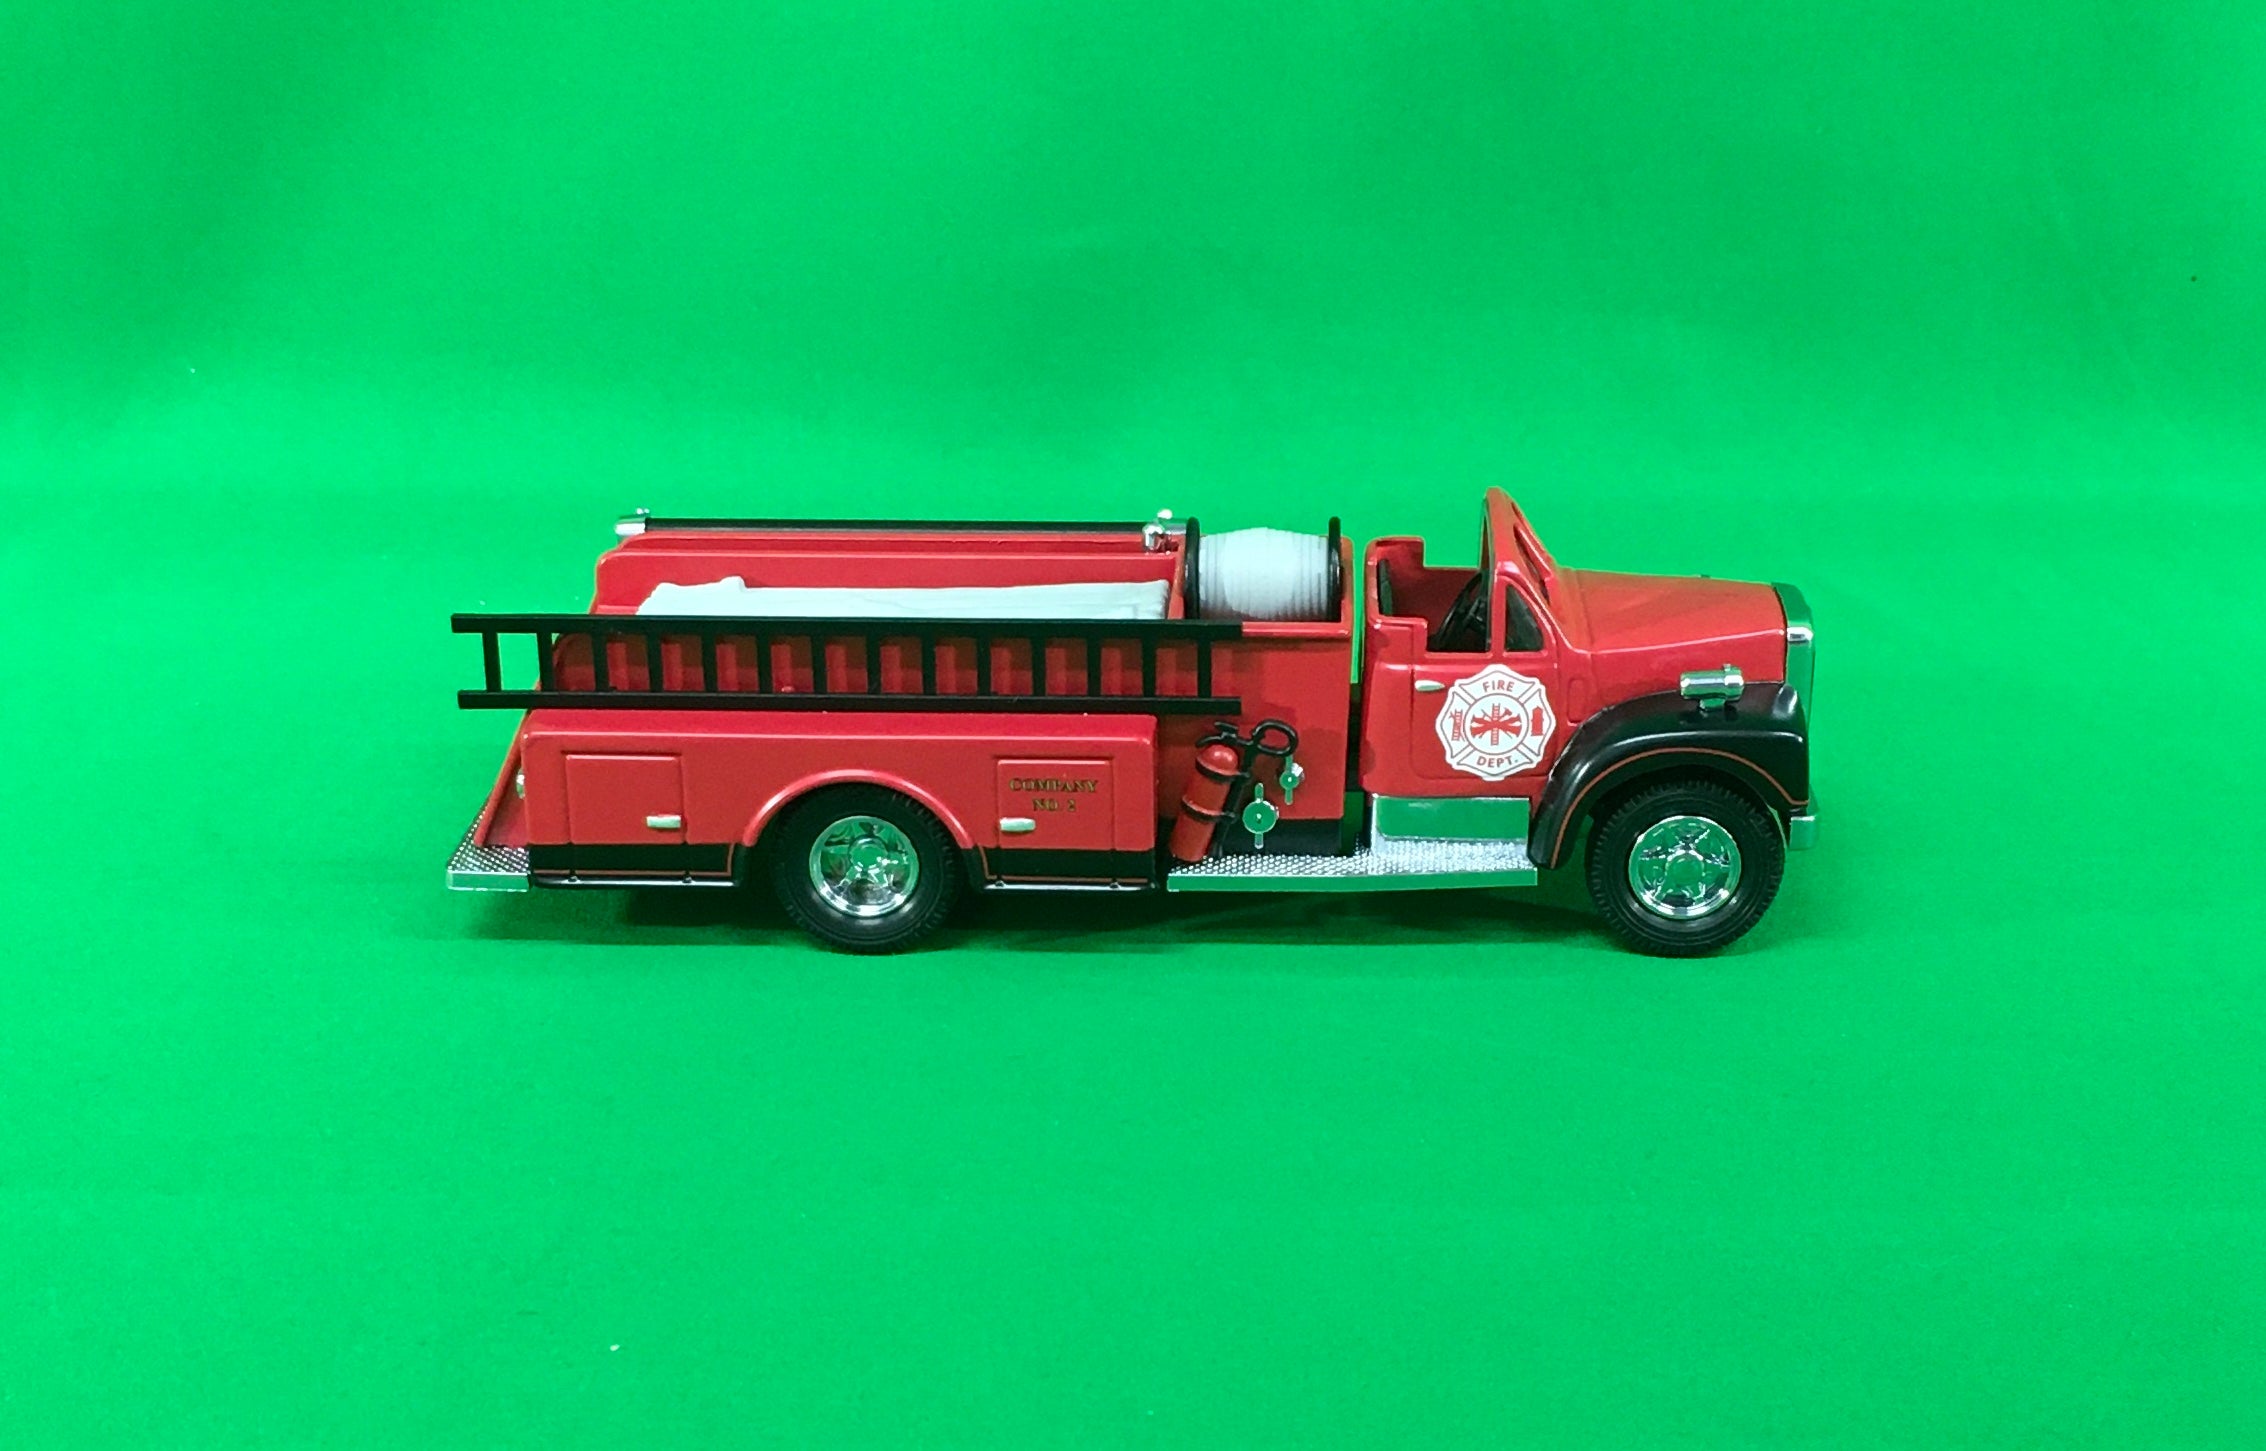 Lionel 2230060 - Fire Truck (Red)